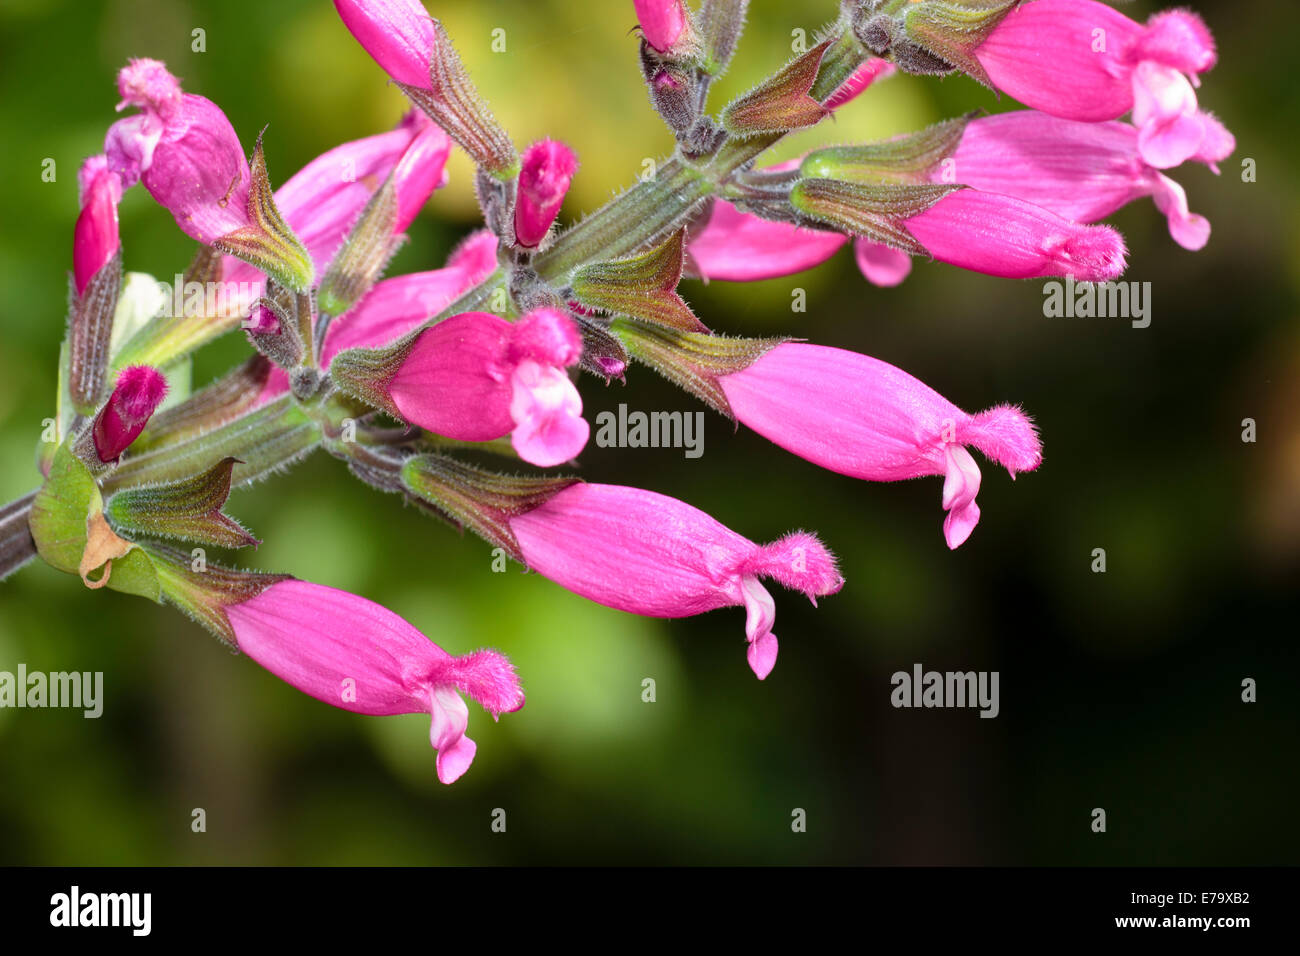 Pink flowers of the tender Mexican plant, Salvia involucrata 'Bethellii' Stock Photo